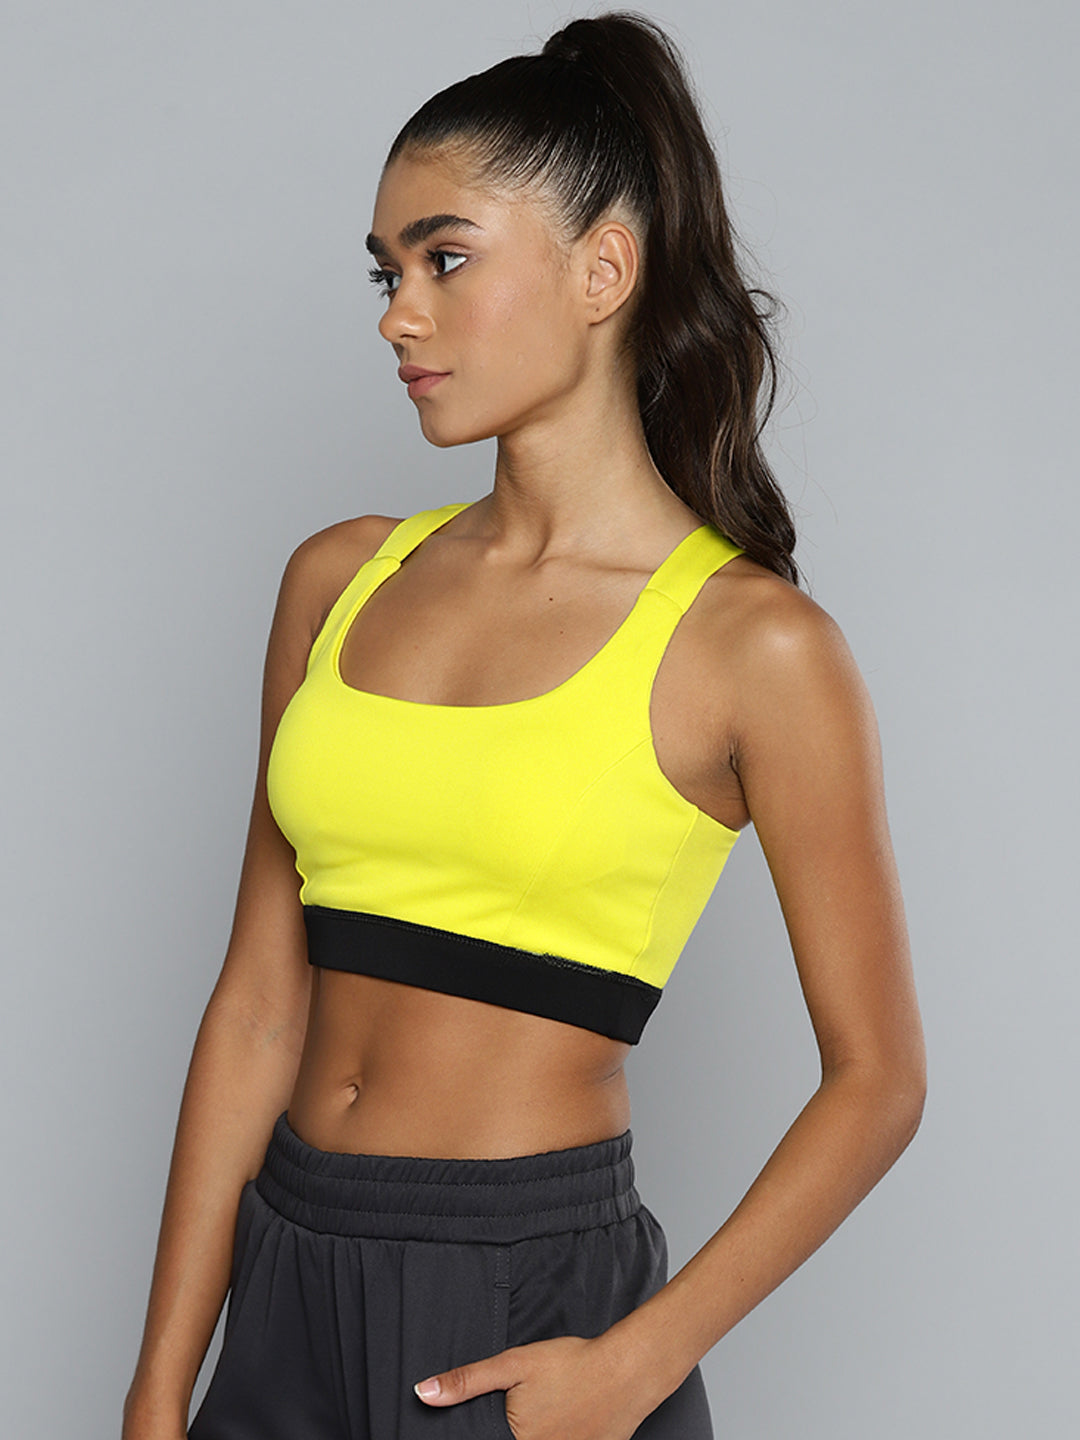 ALCIS Lime Green & Solid Workout Bra